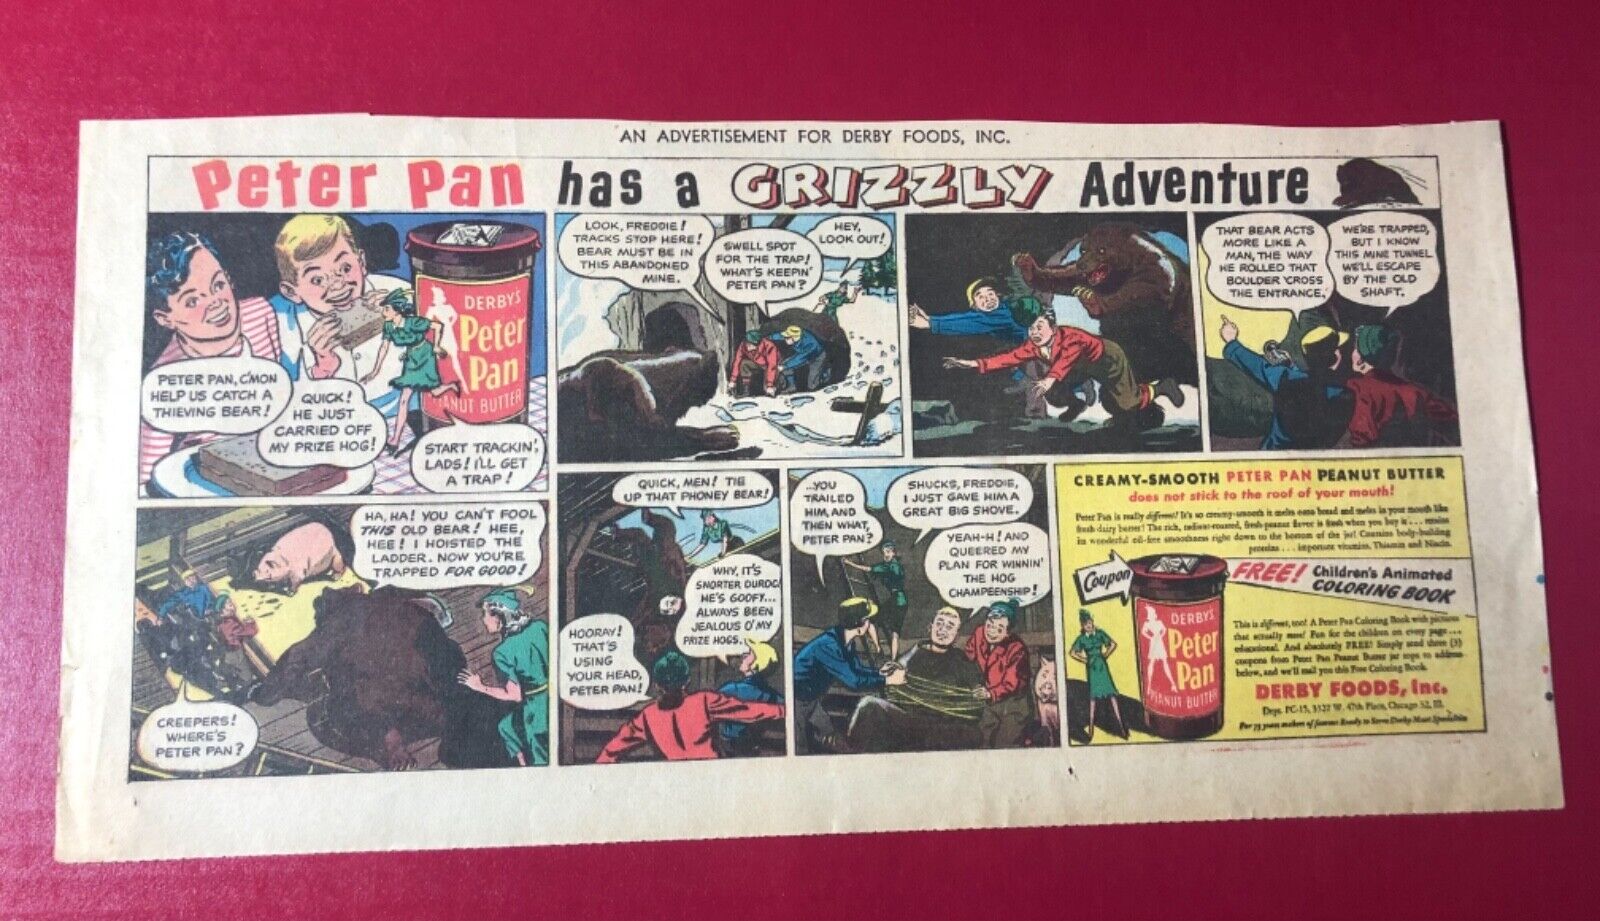 1940’s “Peter Pan Has A Grizzly Adventure” Derby’s Peanut Butter ad 15.5x7.5”